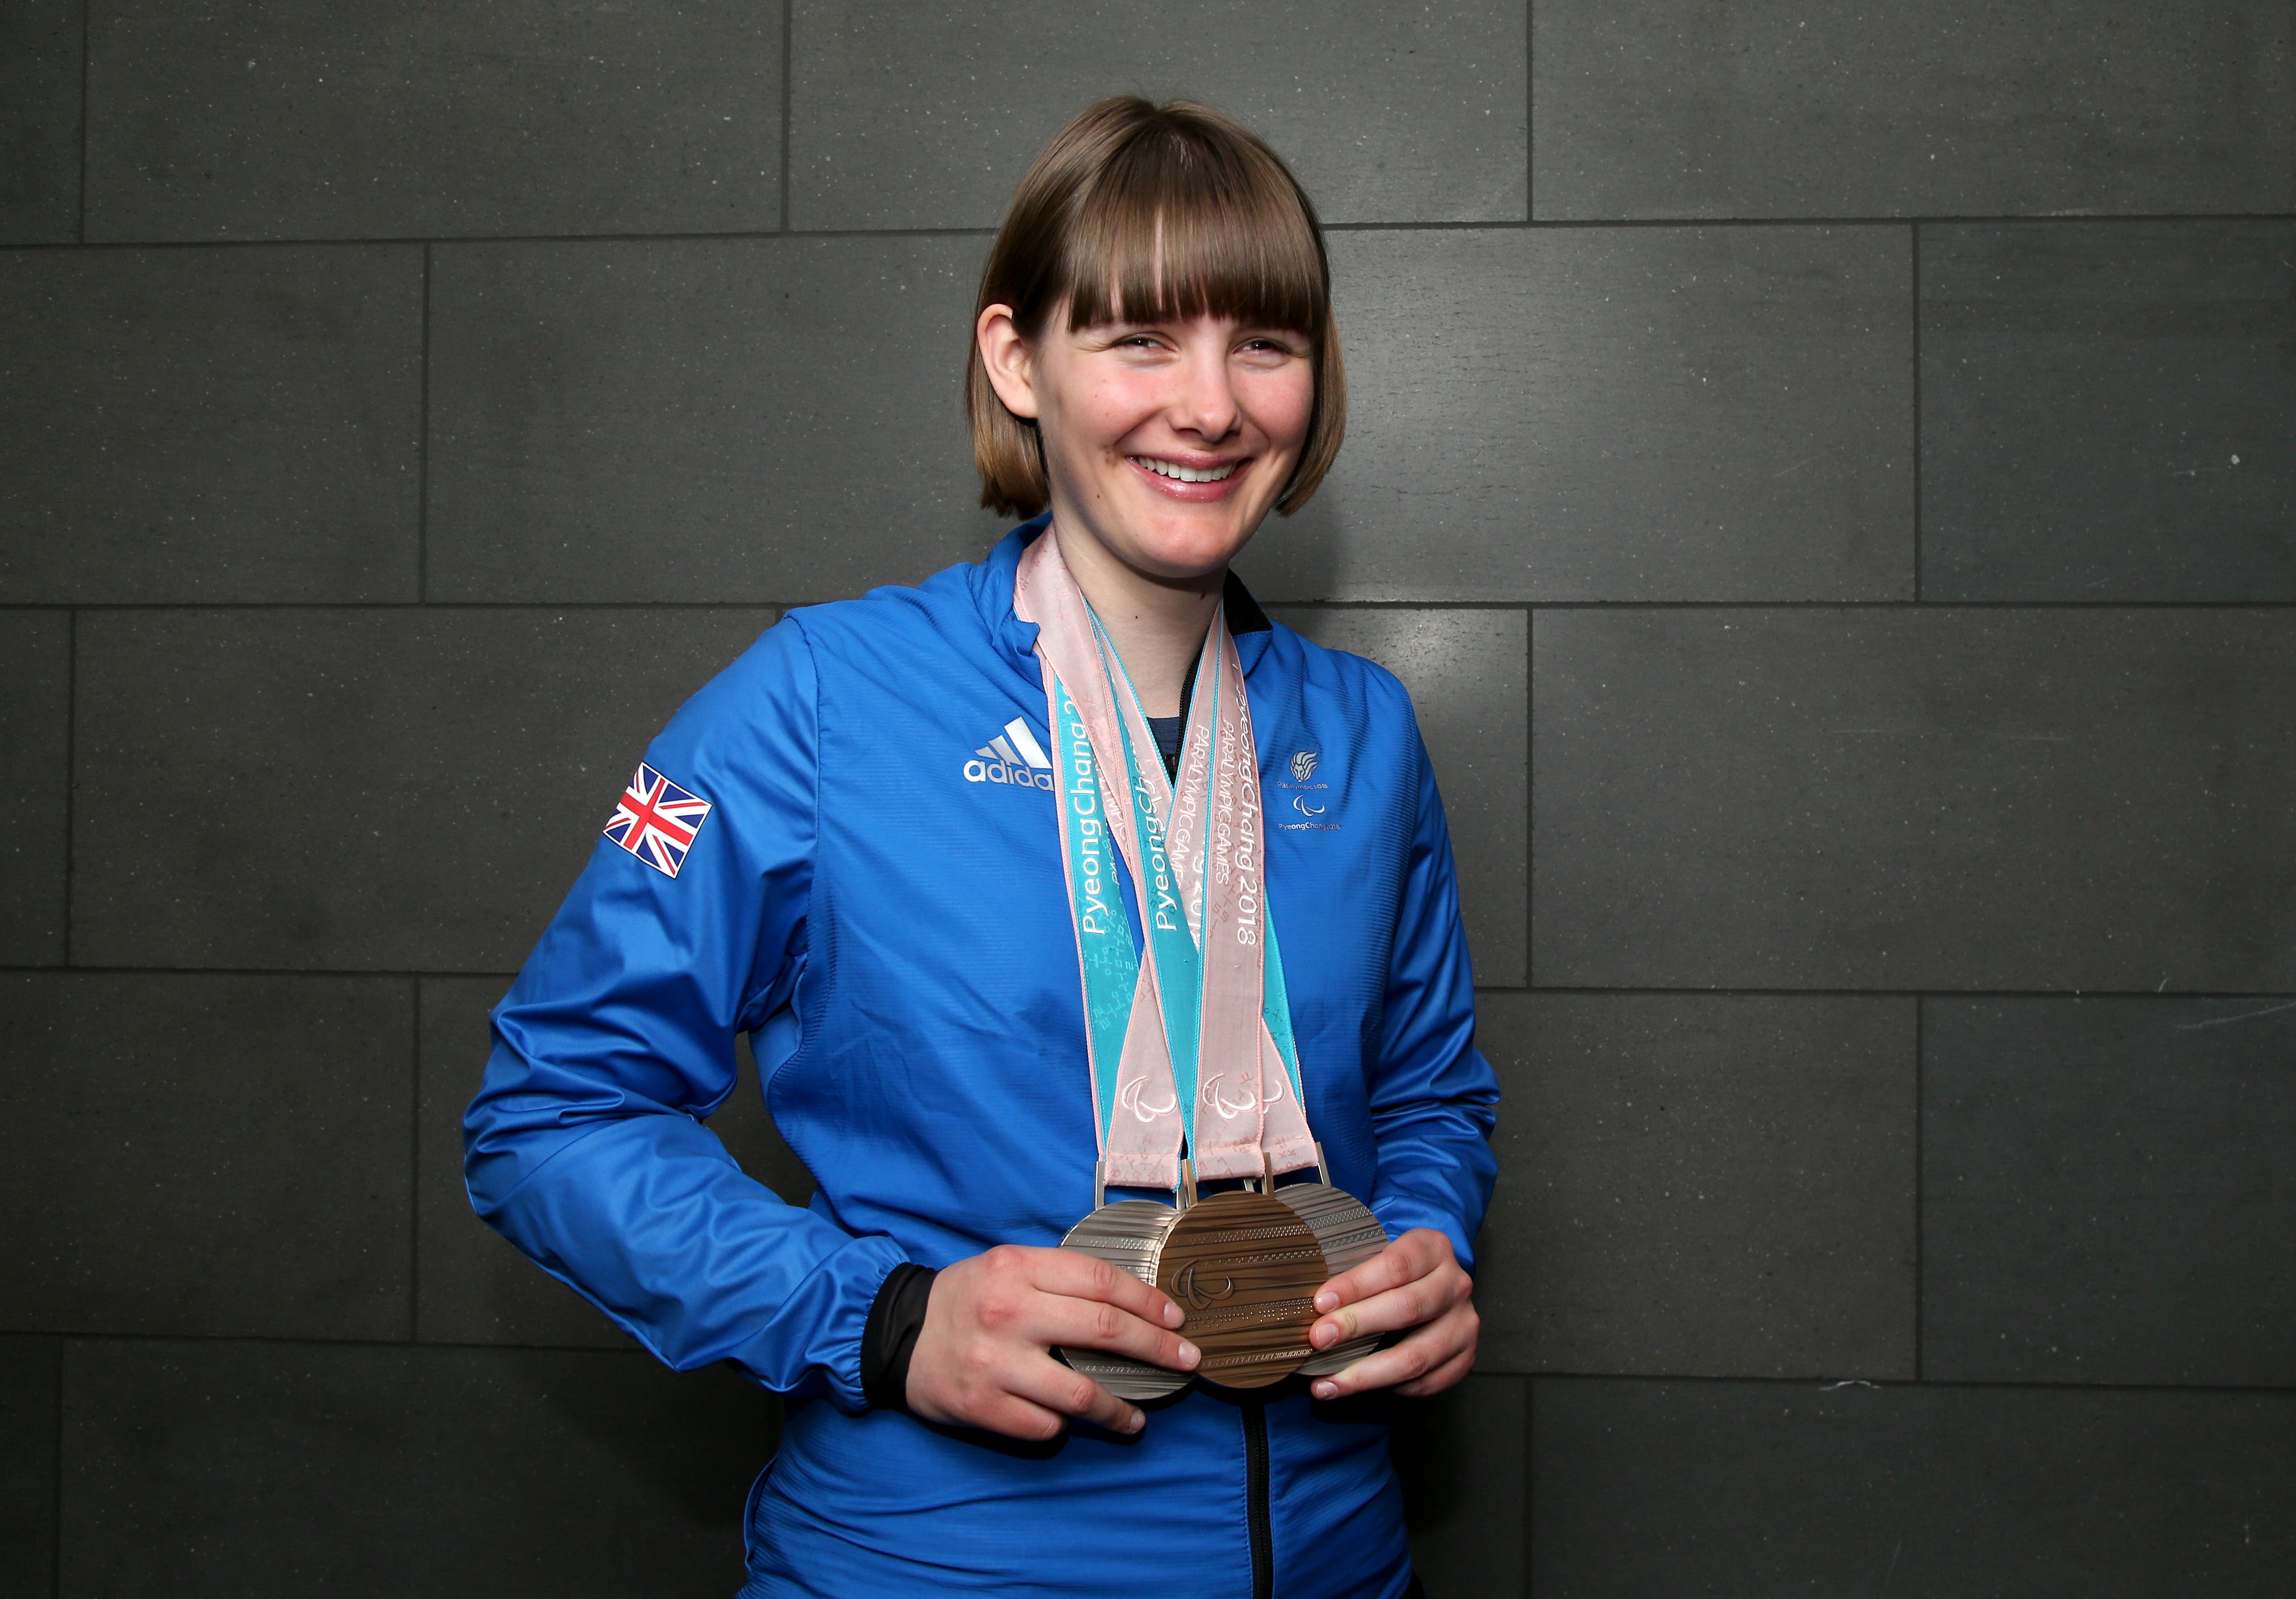 Millie Knight poses with her medals after arriving back from the PyeongChang 2018 Paralympic Winter Games